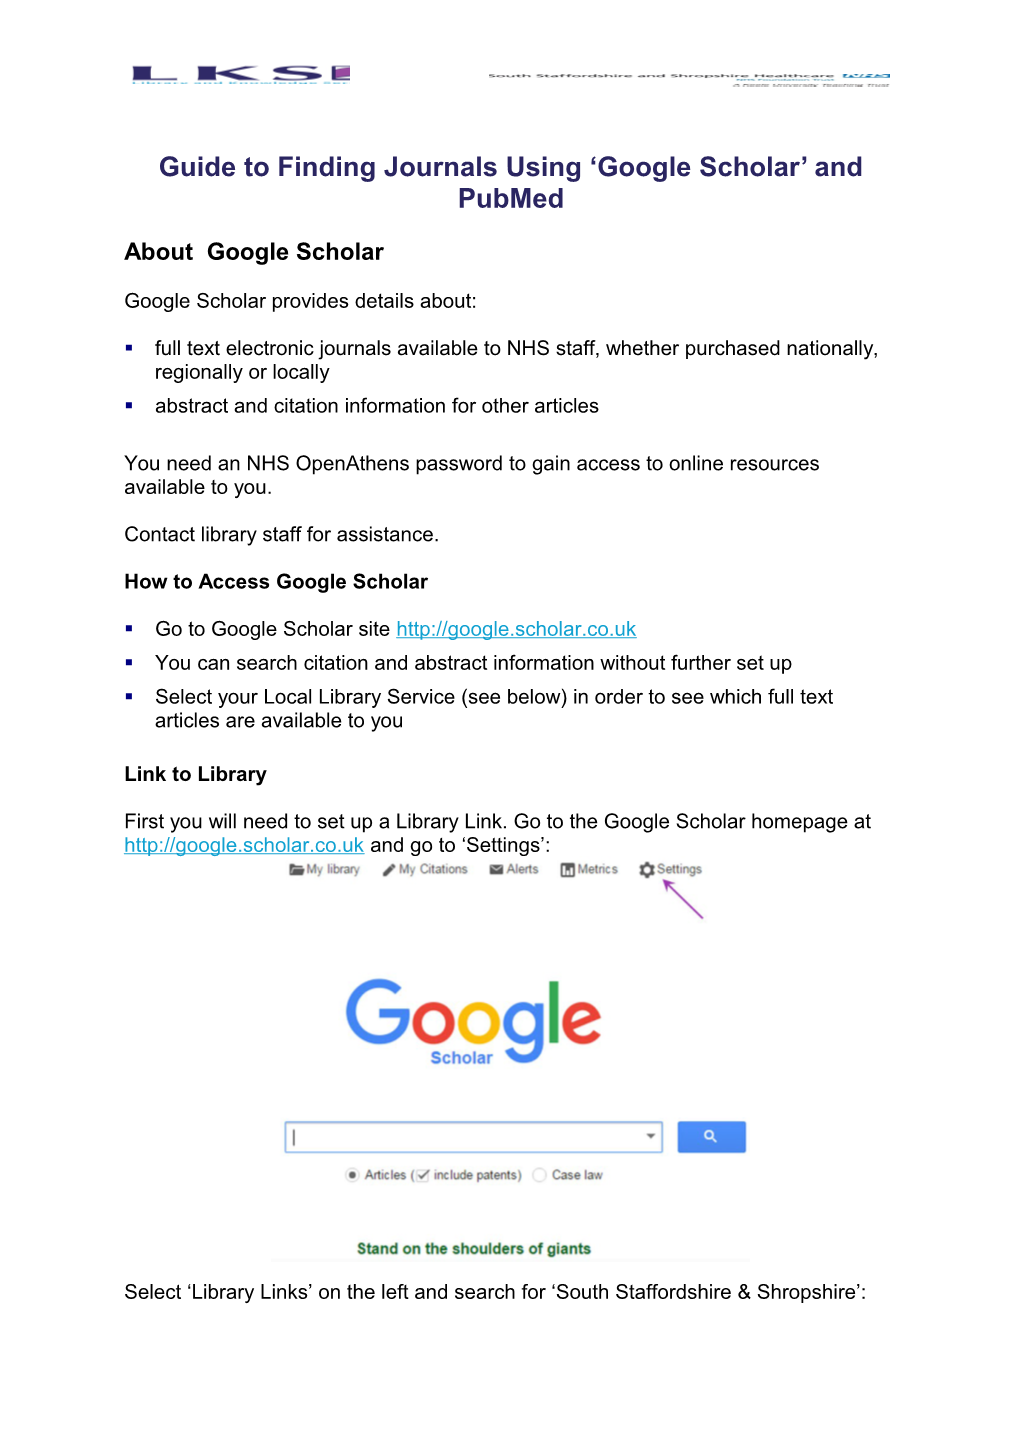 Guide to Finding Journals Using Google Scholar and Pubmed